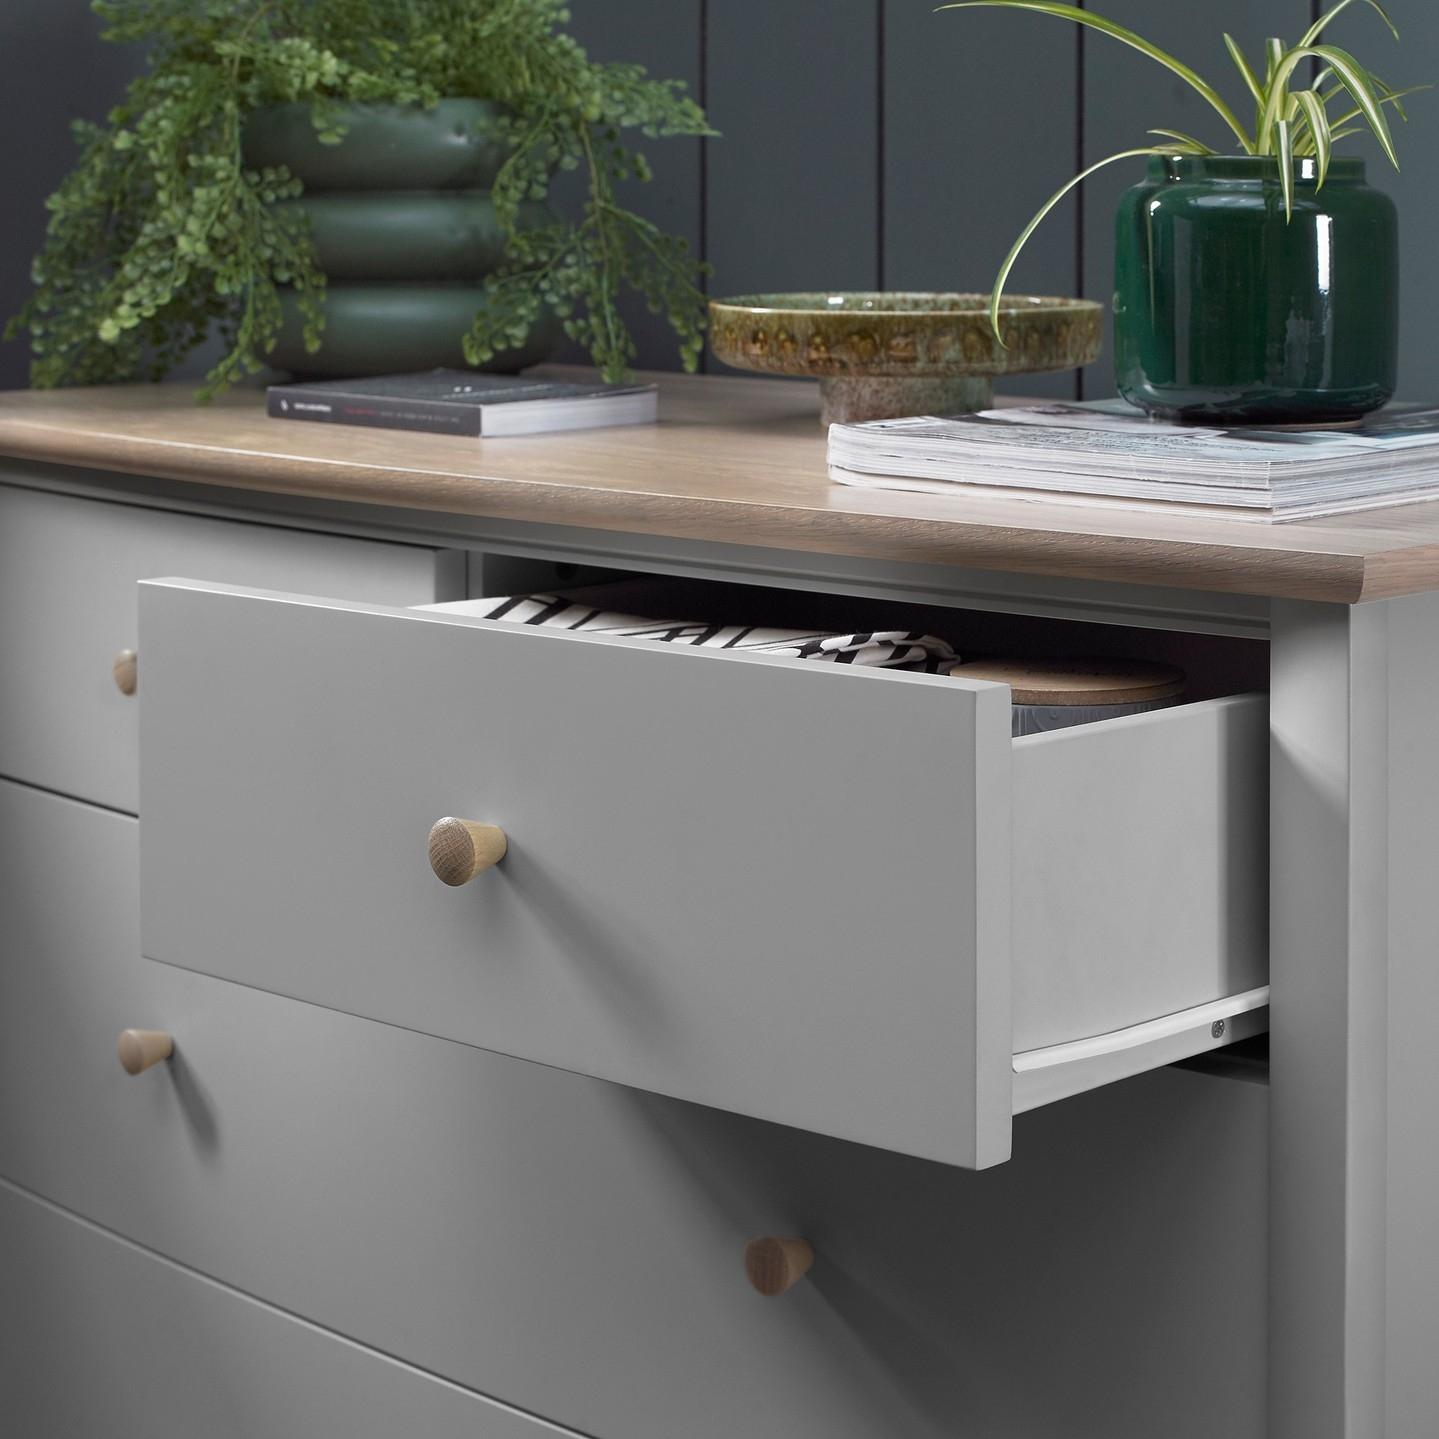 Fall in love with the little things.⁠ ⁠ Our Whitby range features beautifully crafted drawers, sm...